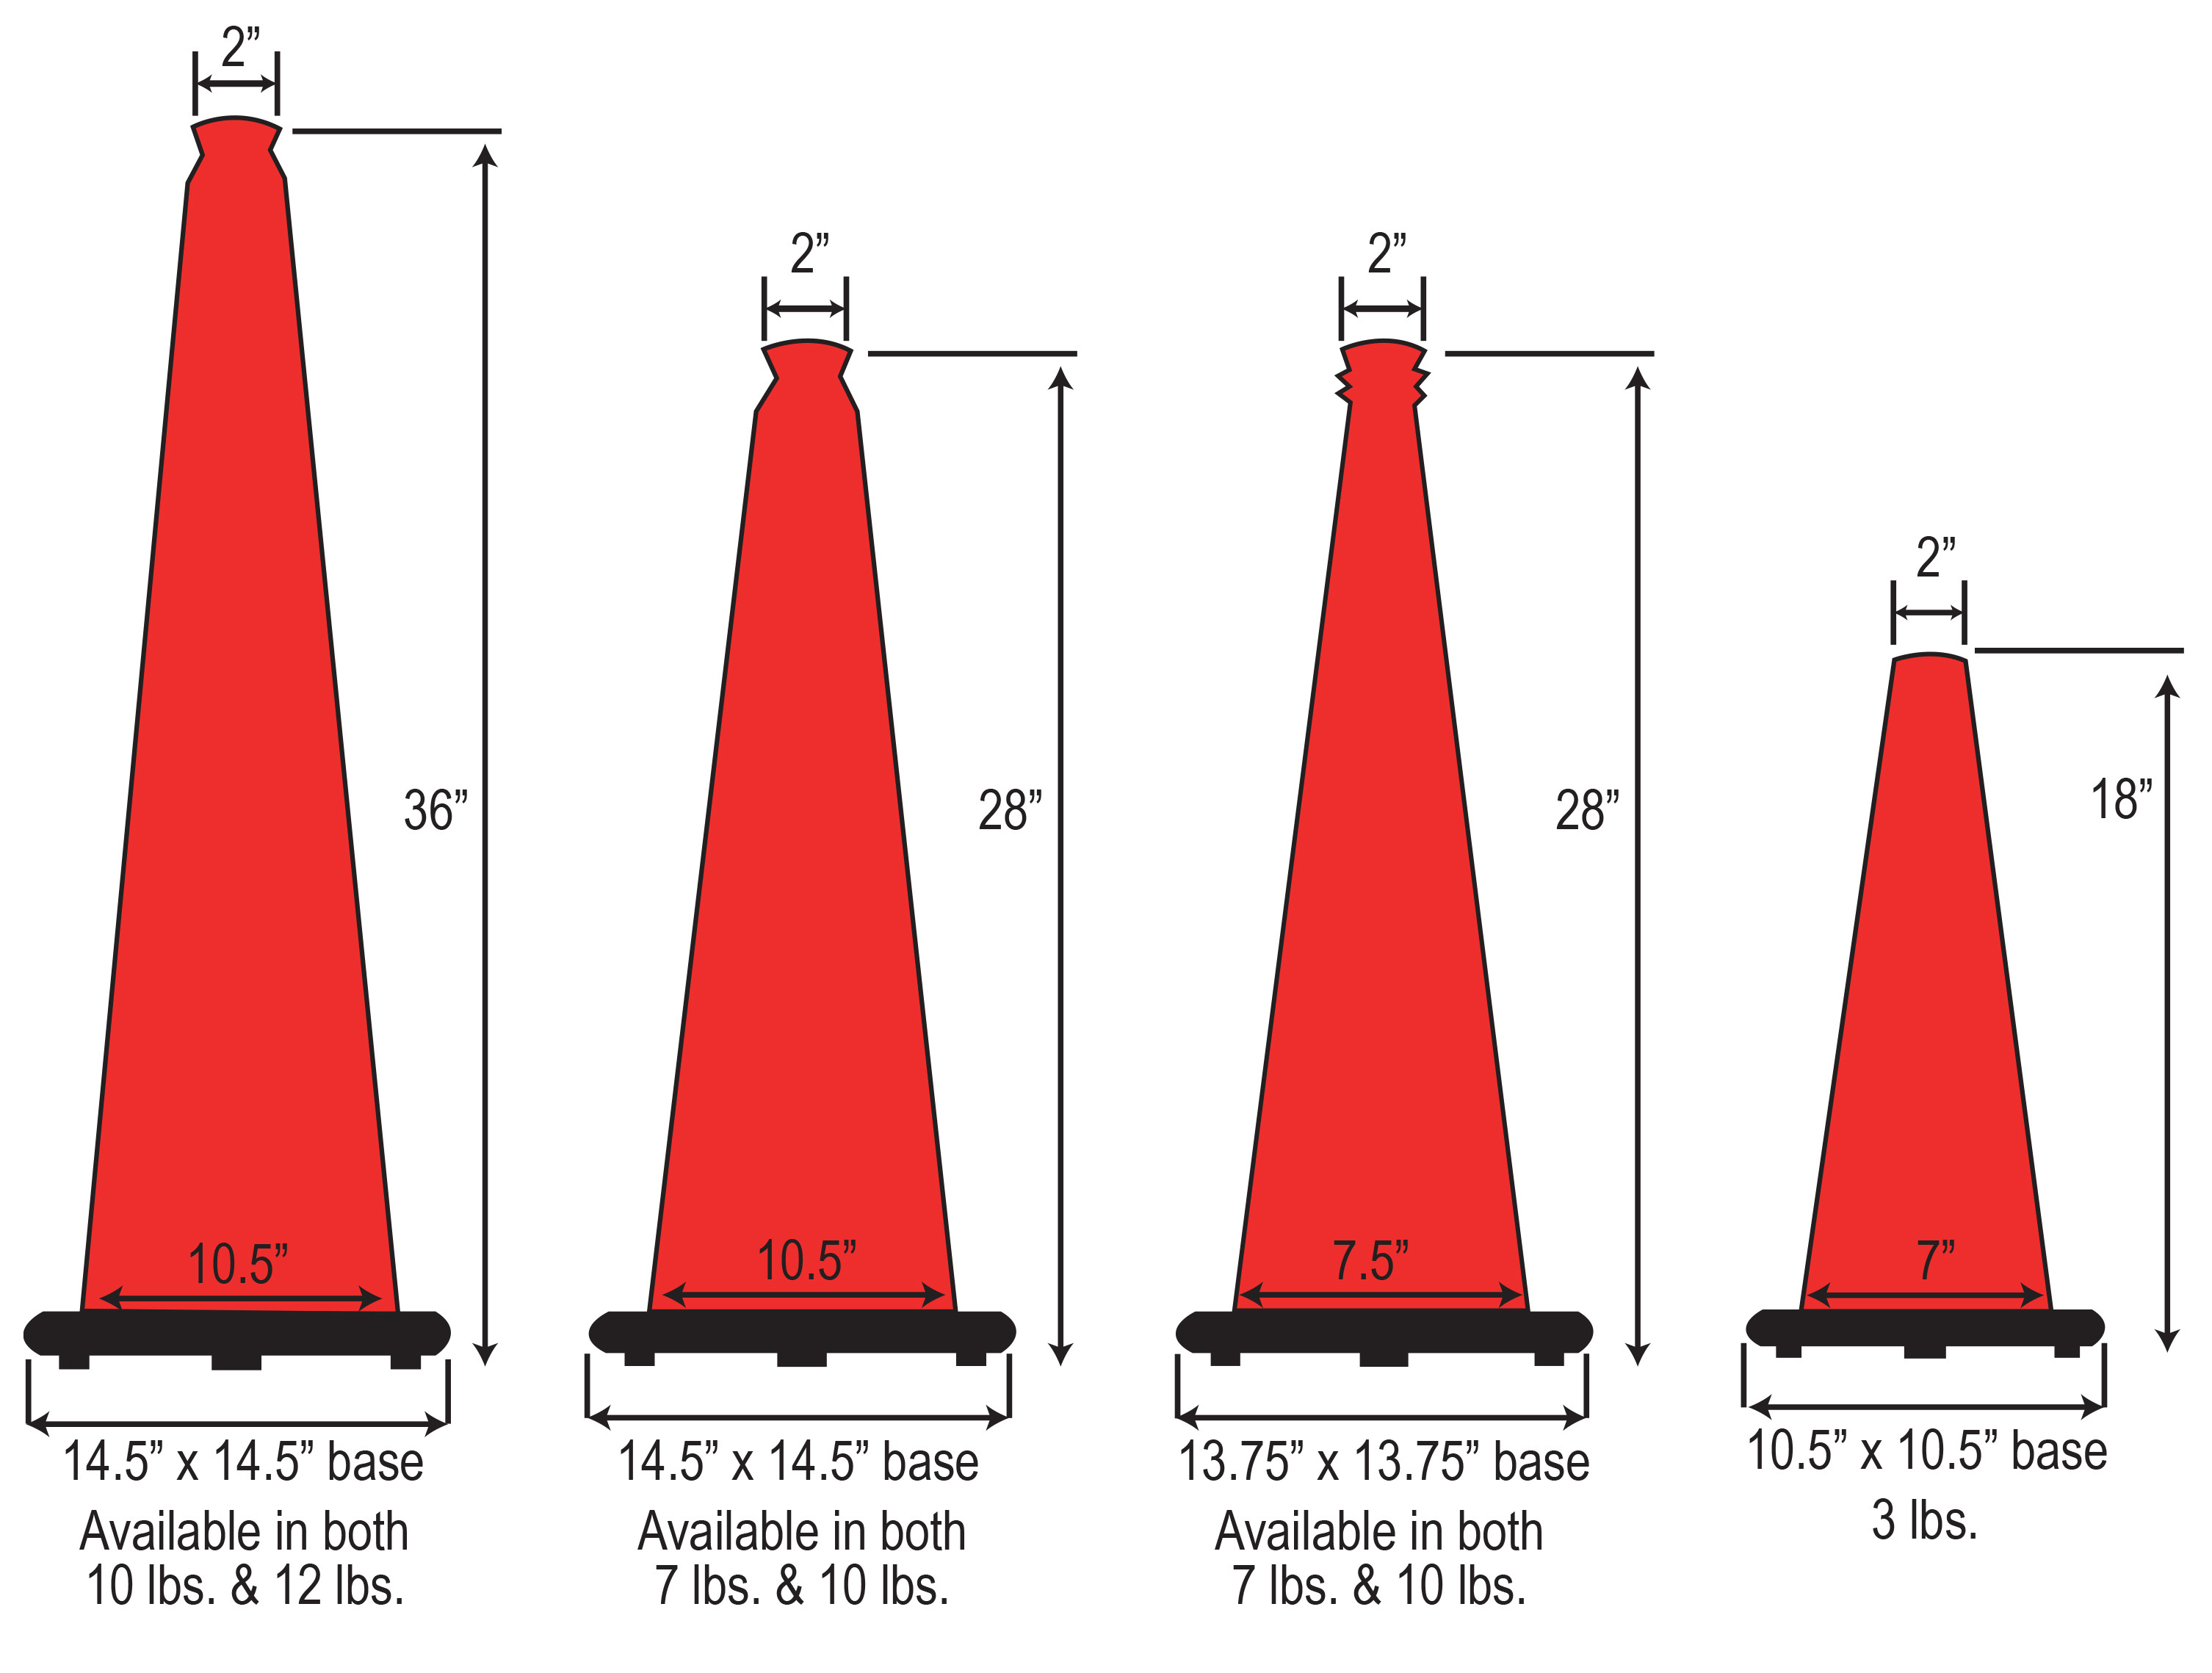 PVC Cone Specifications